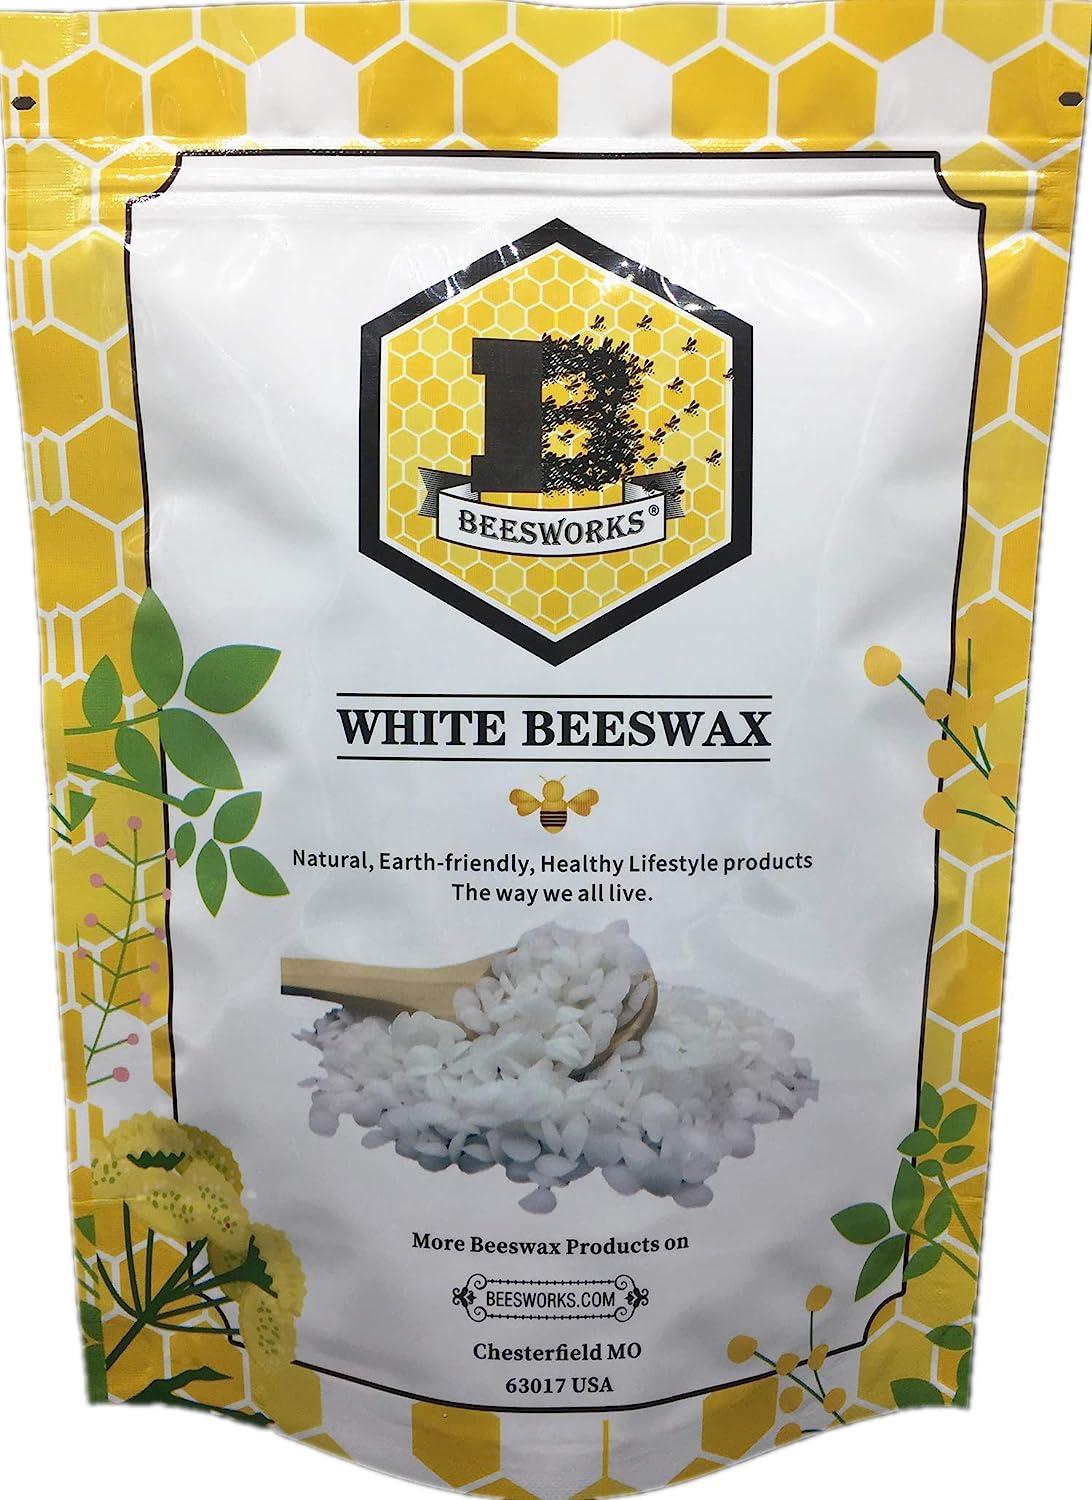 Better Shea Butter Organic Beeswax Pellets | Use it to make Candles, Food  Wraps, Furniture Polish, Lip Balms | Food Grade, 100% Pure, Yellow Beeswax